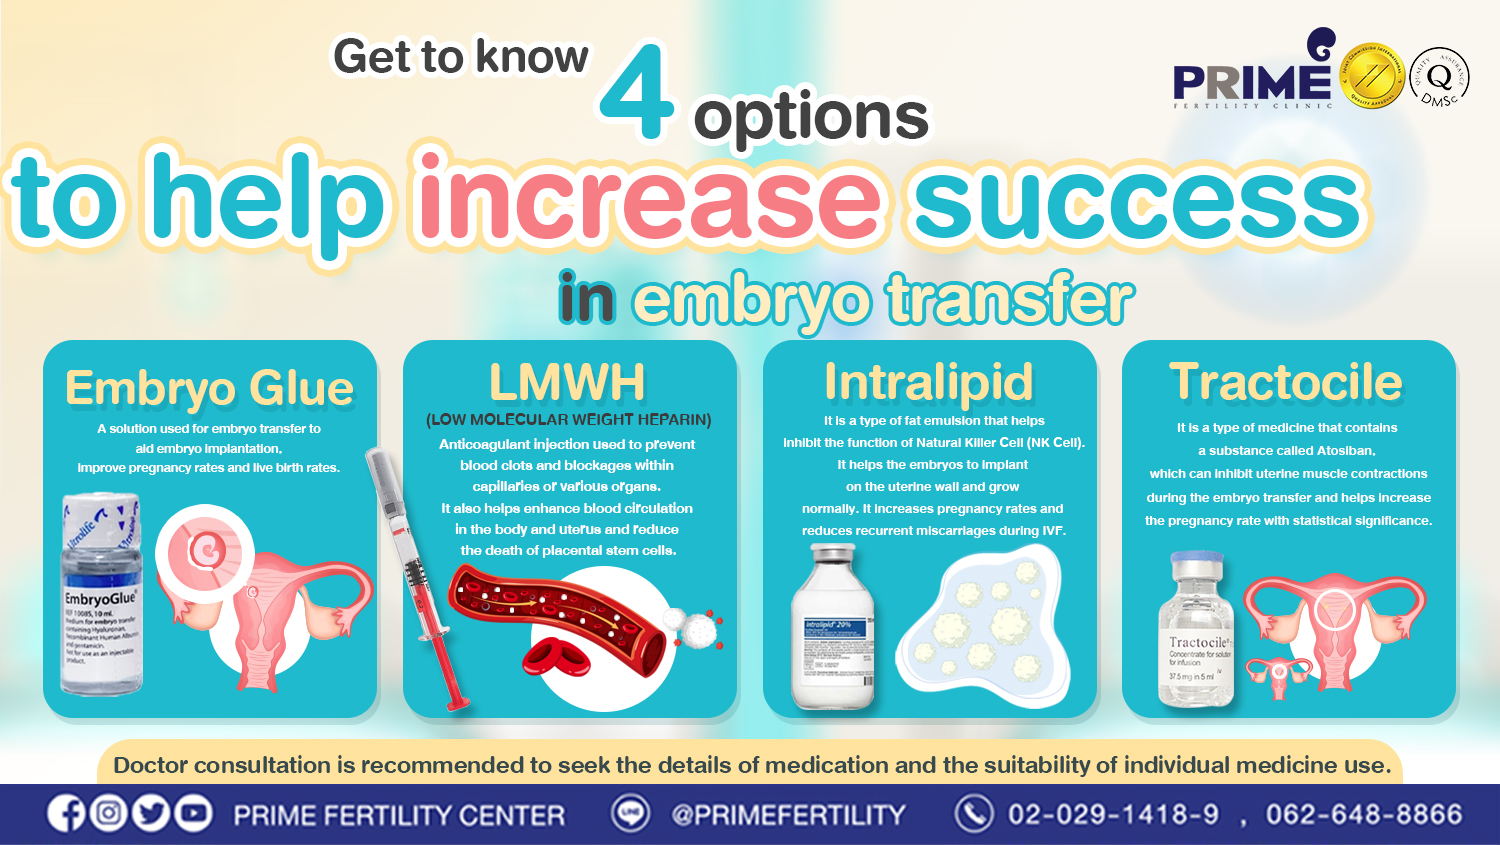 Get to know 4 options to help increase success in embryo transfer